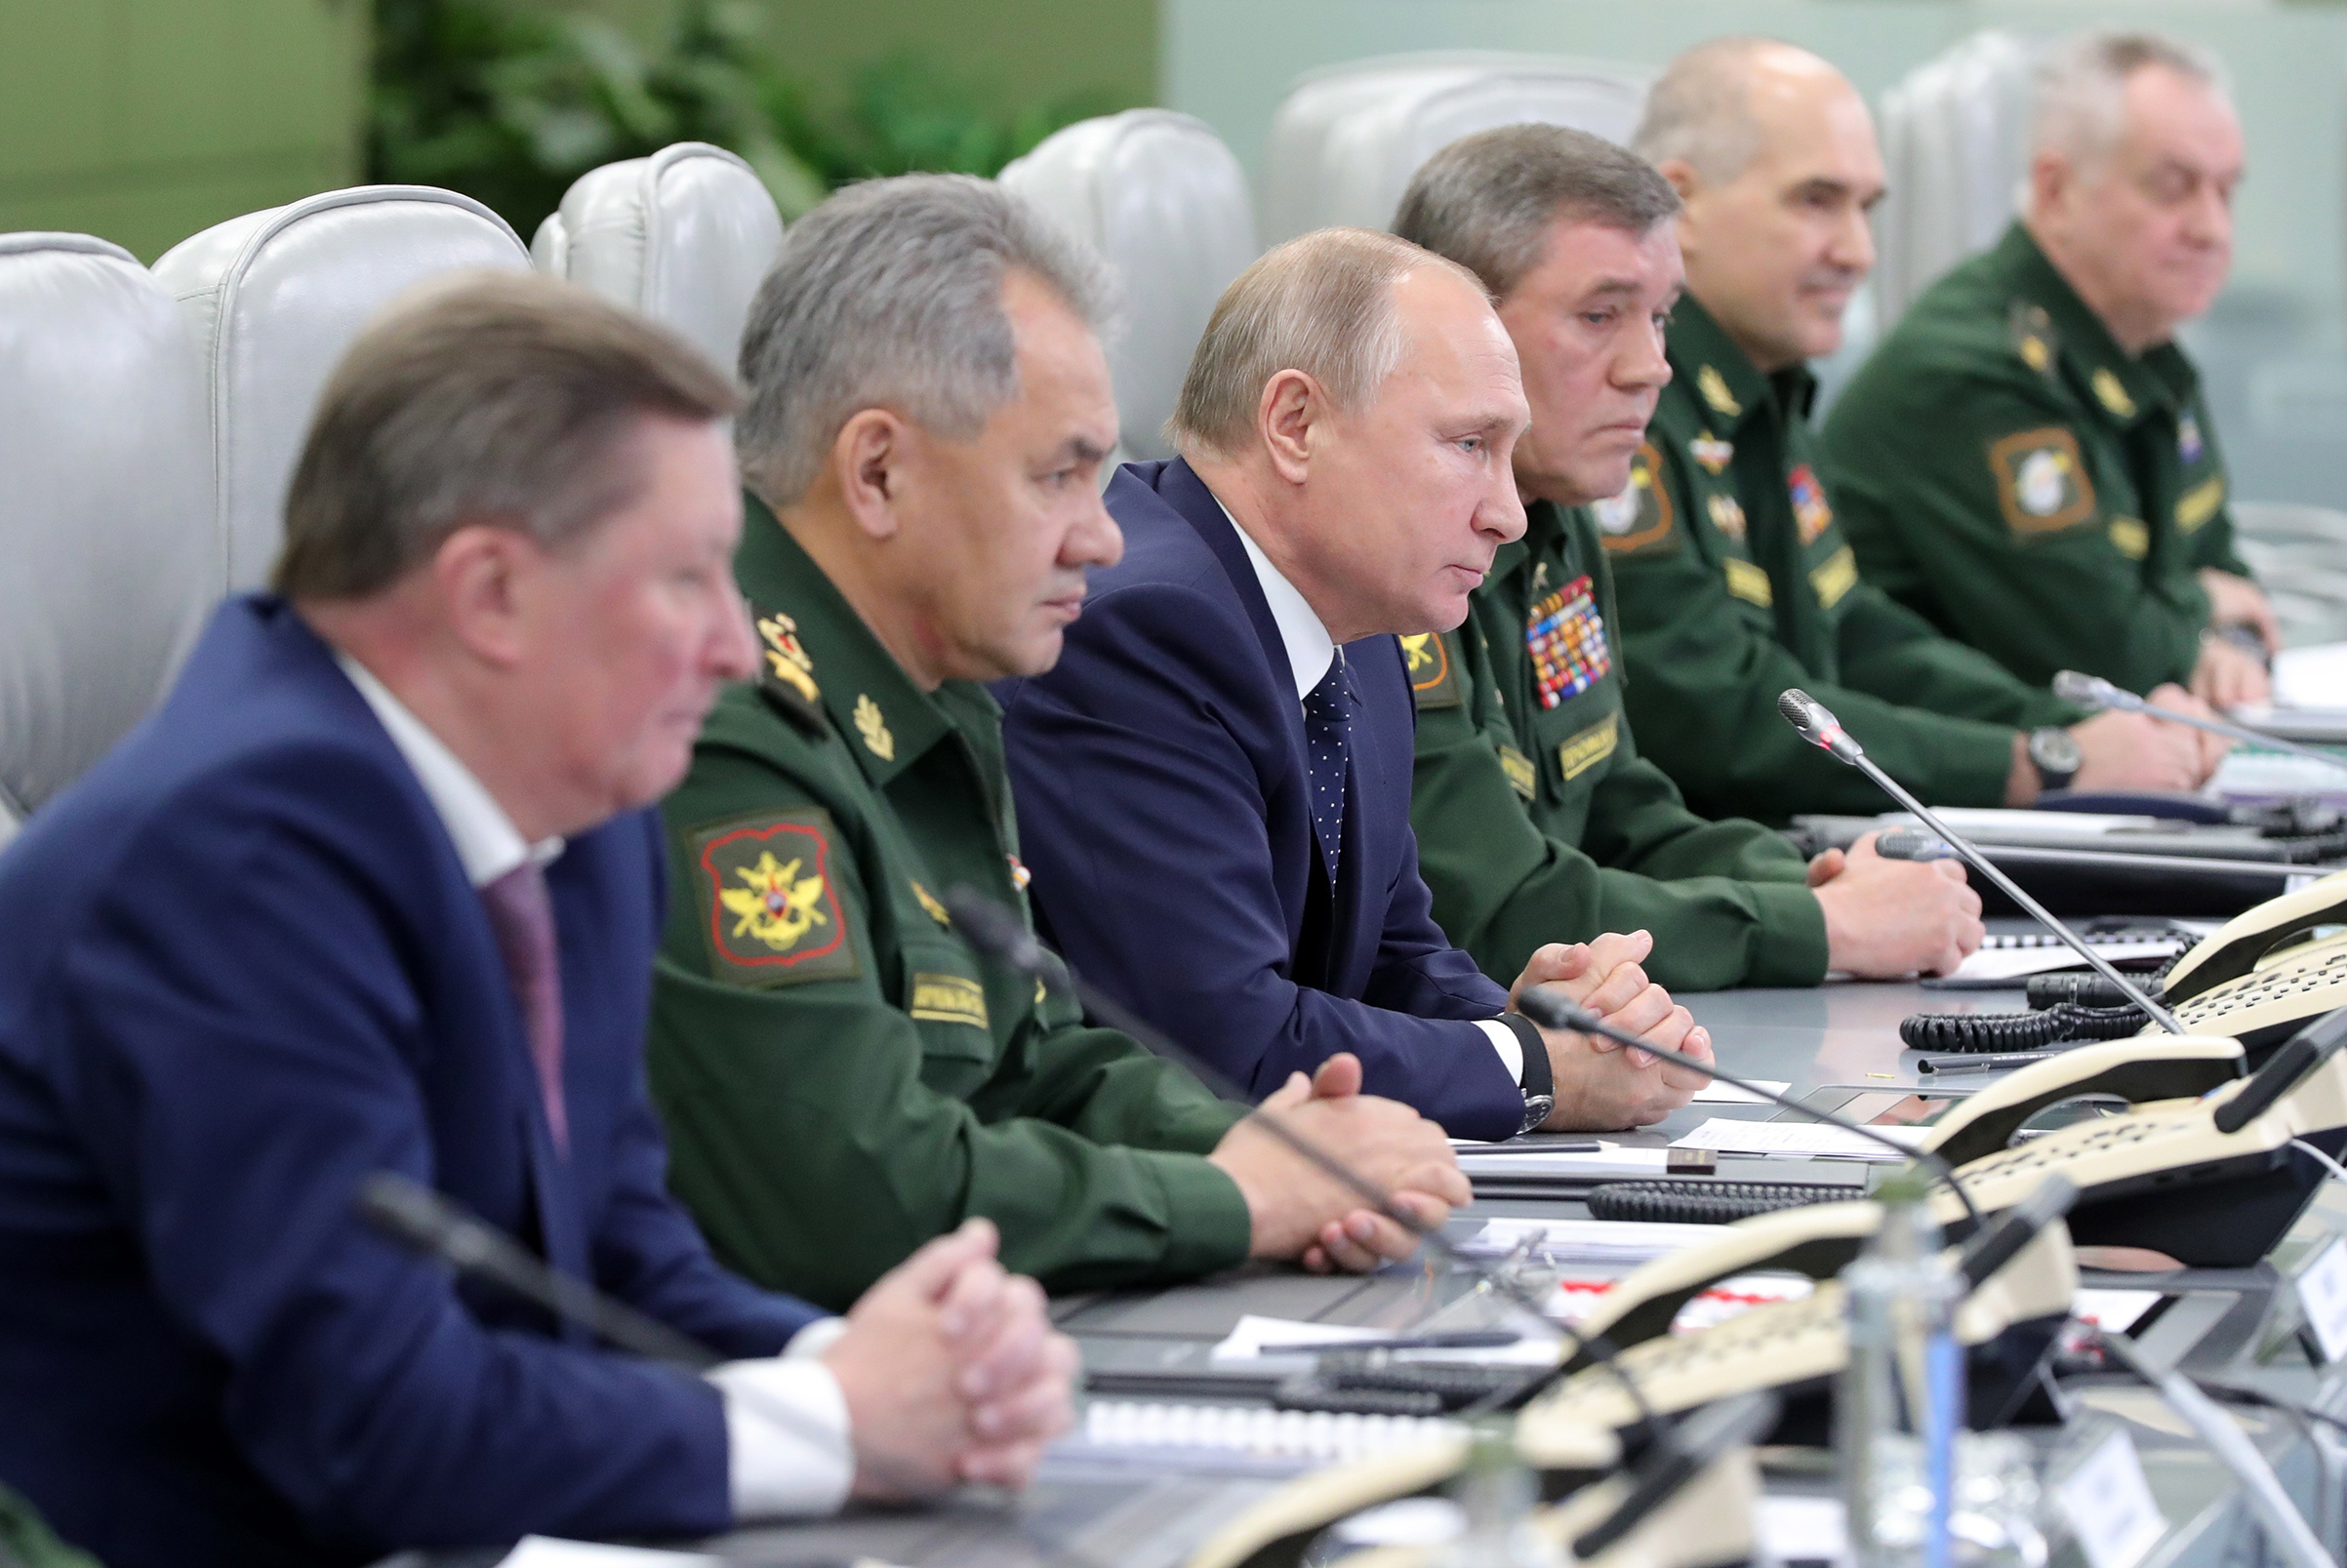 Vladimir Putin, center, watches the launch of a new Russian hypersonic missile system on Dec. 26 (Mikhail Klimentyev—Russian Presidential Press and Information Office/TASS/Getty Images)